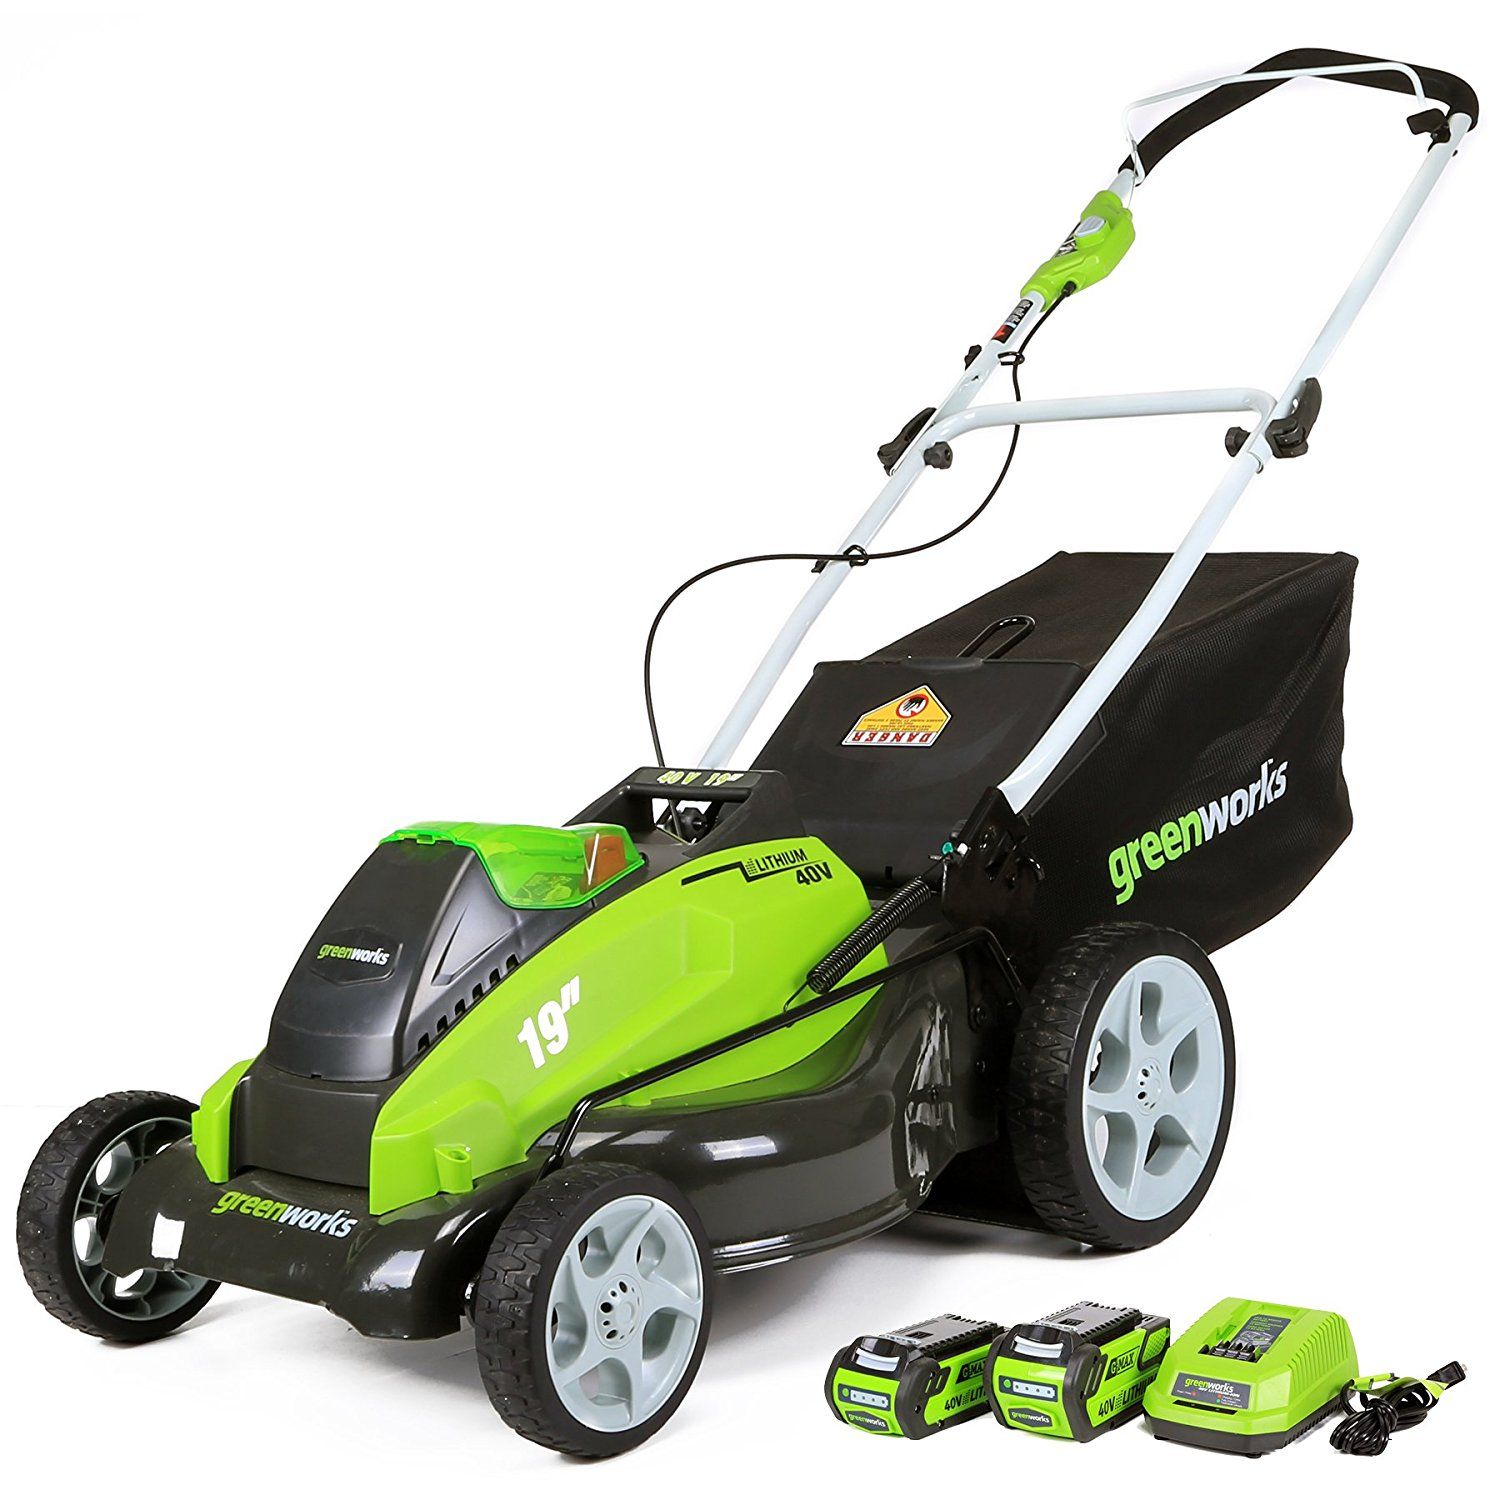 The Best Battery Powered Lawn Mower for 2019